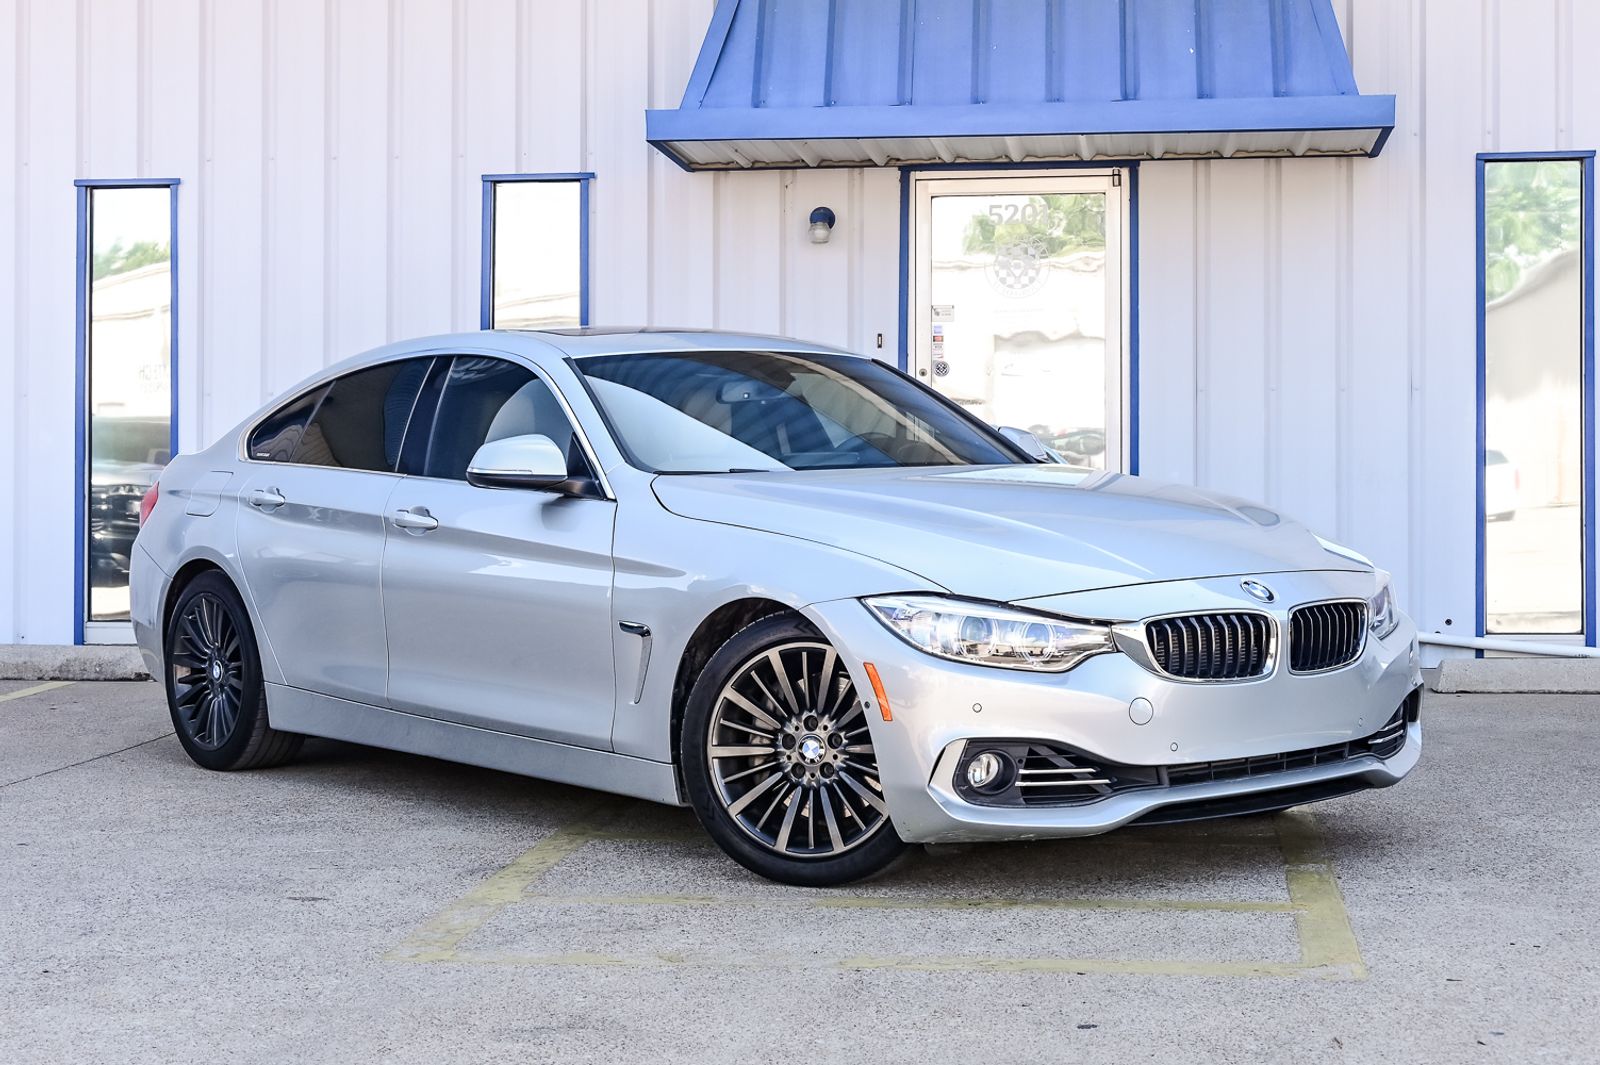 2016 BMW 435i Gran Coupe 3.0L TURBO CHARGED 435i GRAN COUPE LUX PKG NAV |  Rowlett Texas 75088